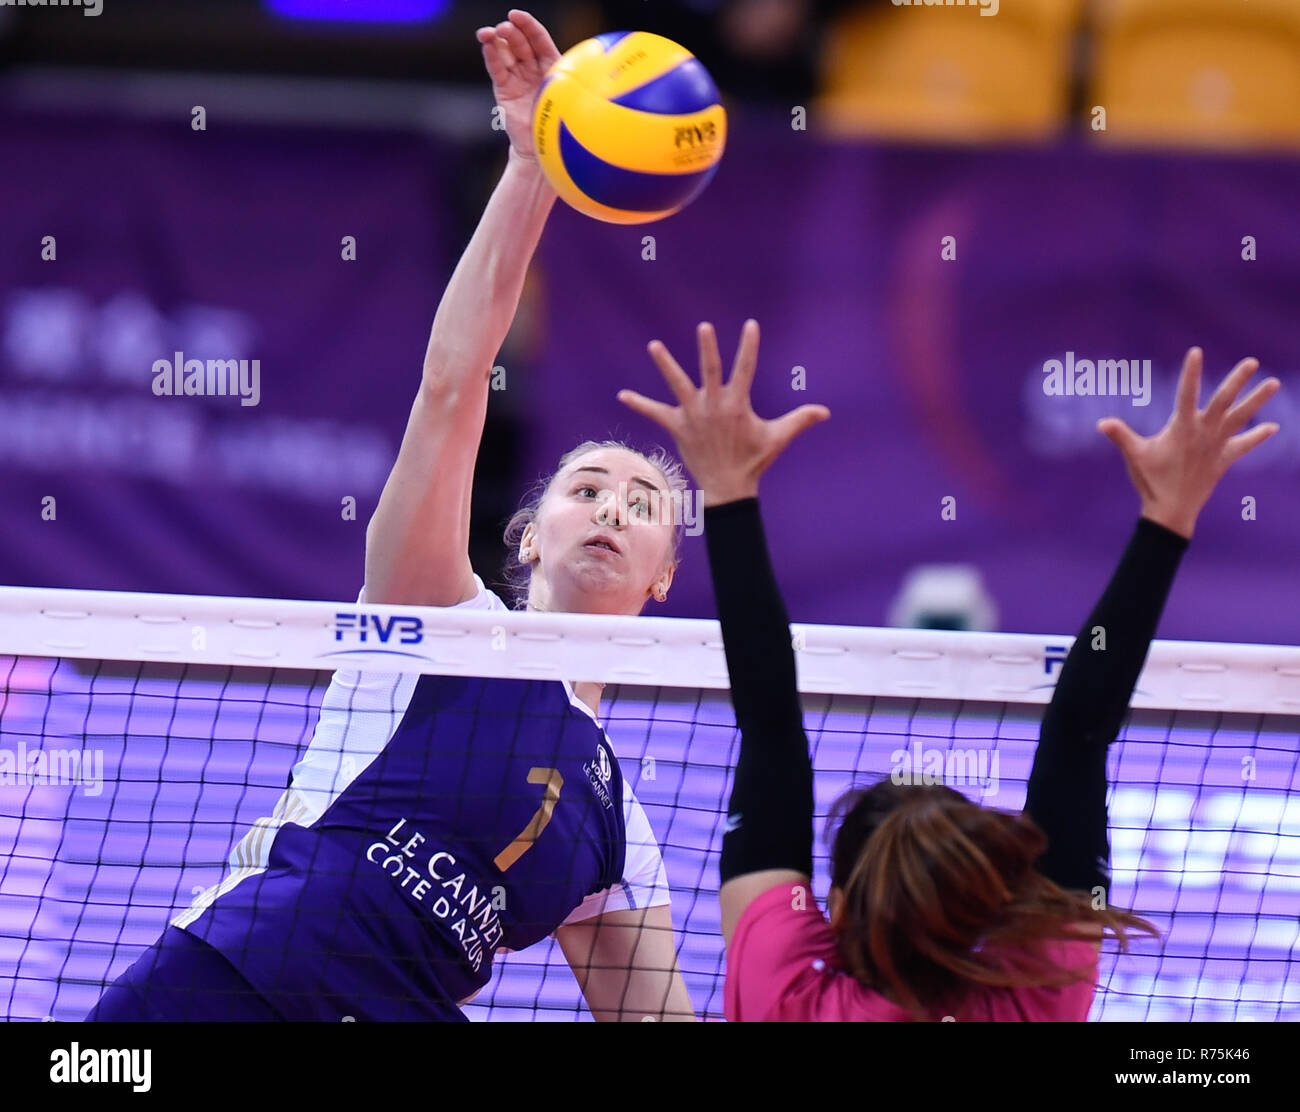 Shaoxing, China's Zhejiang province. 8th Dec, 2018. Angelina Lazarenko (L)  of Volero Le Cannet spikes the ball during a Classification 5-8 match  between Supreme Chonburi of Thailand and Volero Le Cannet of